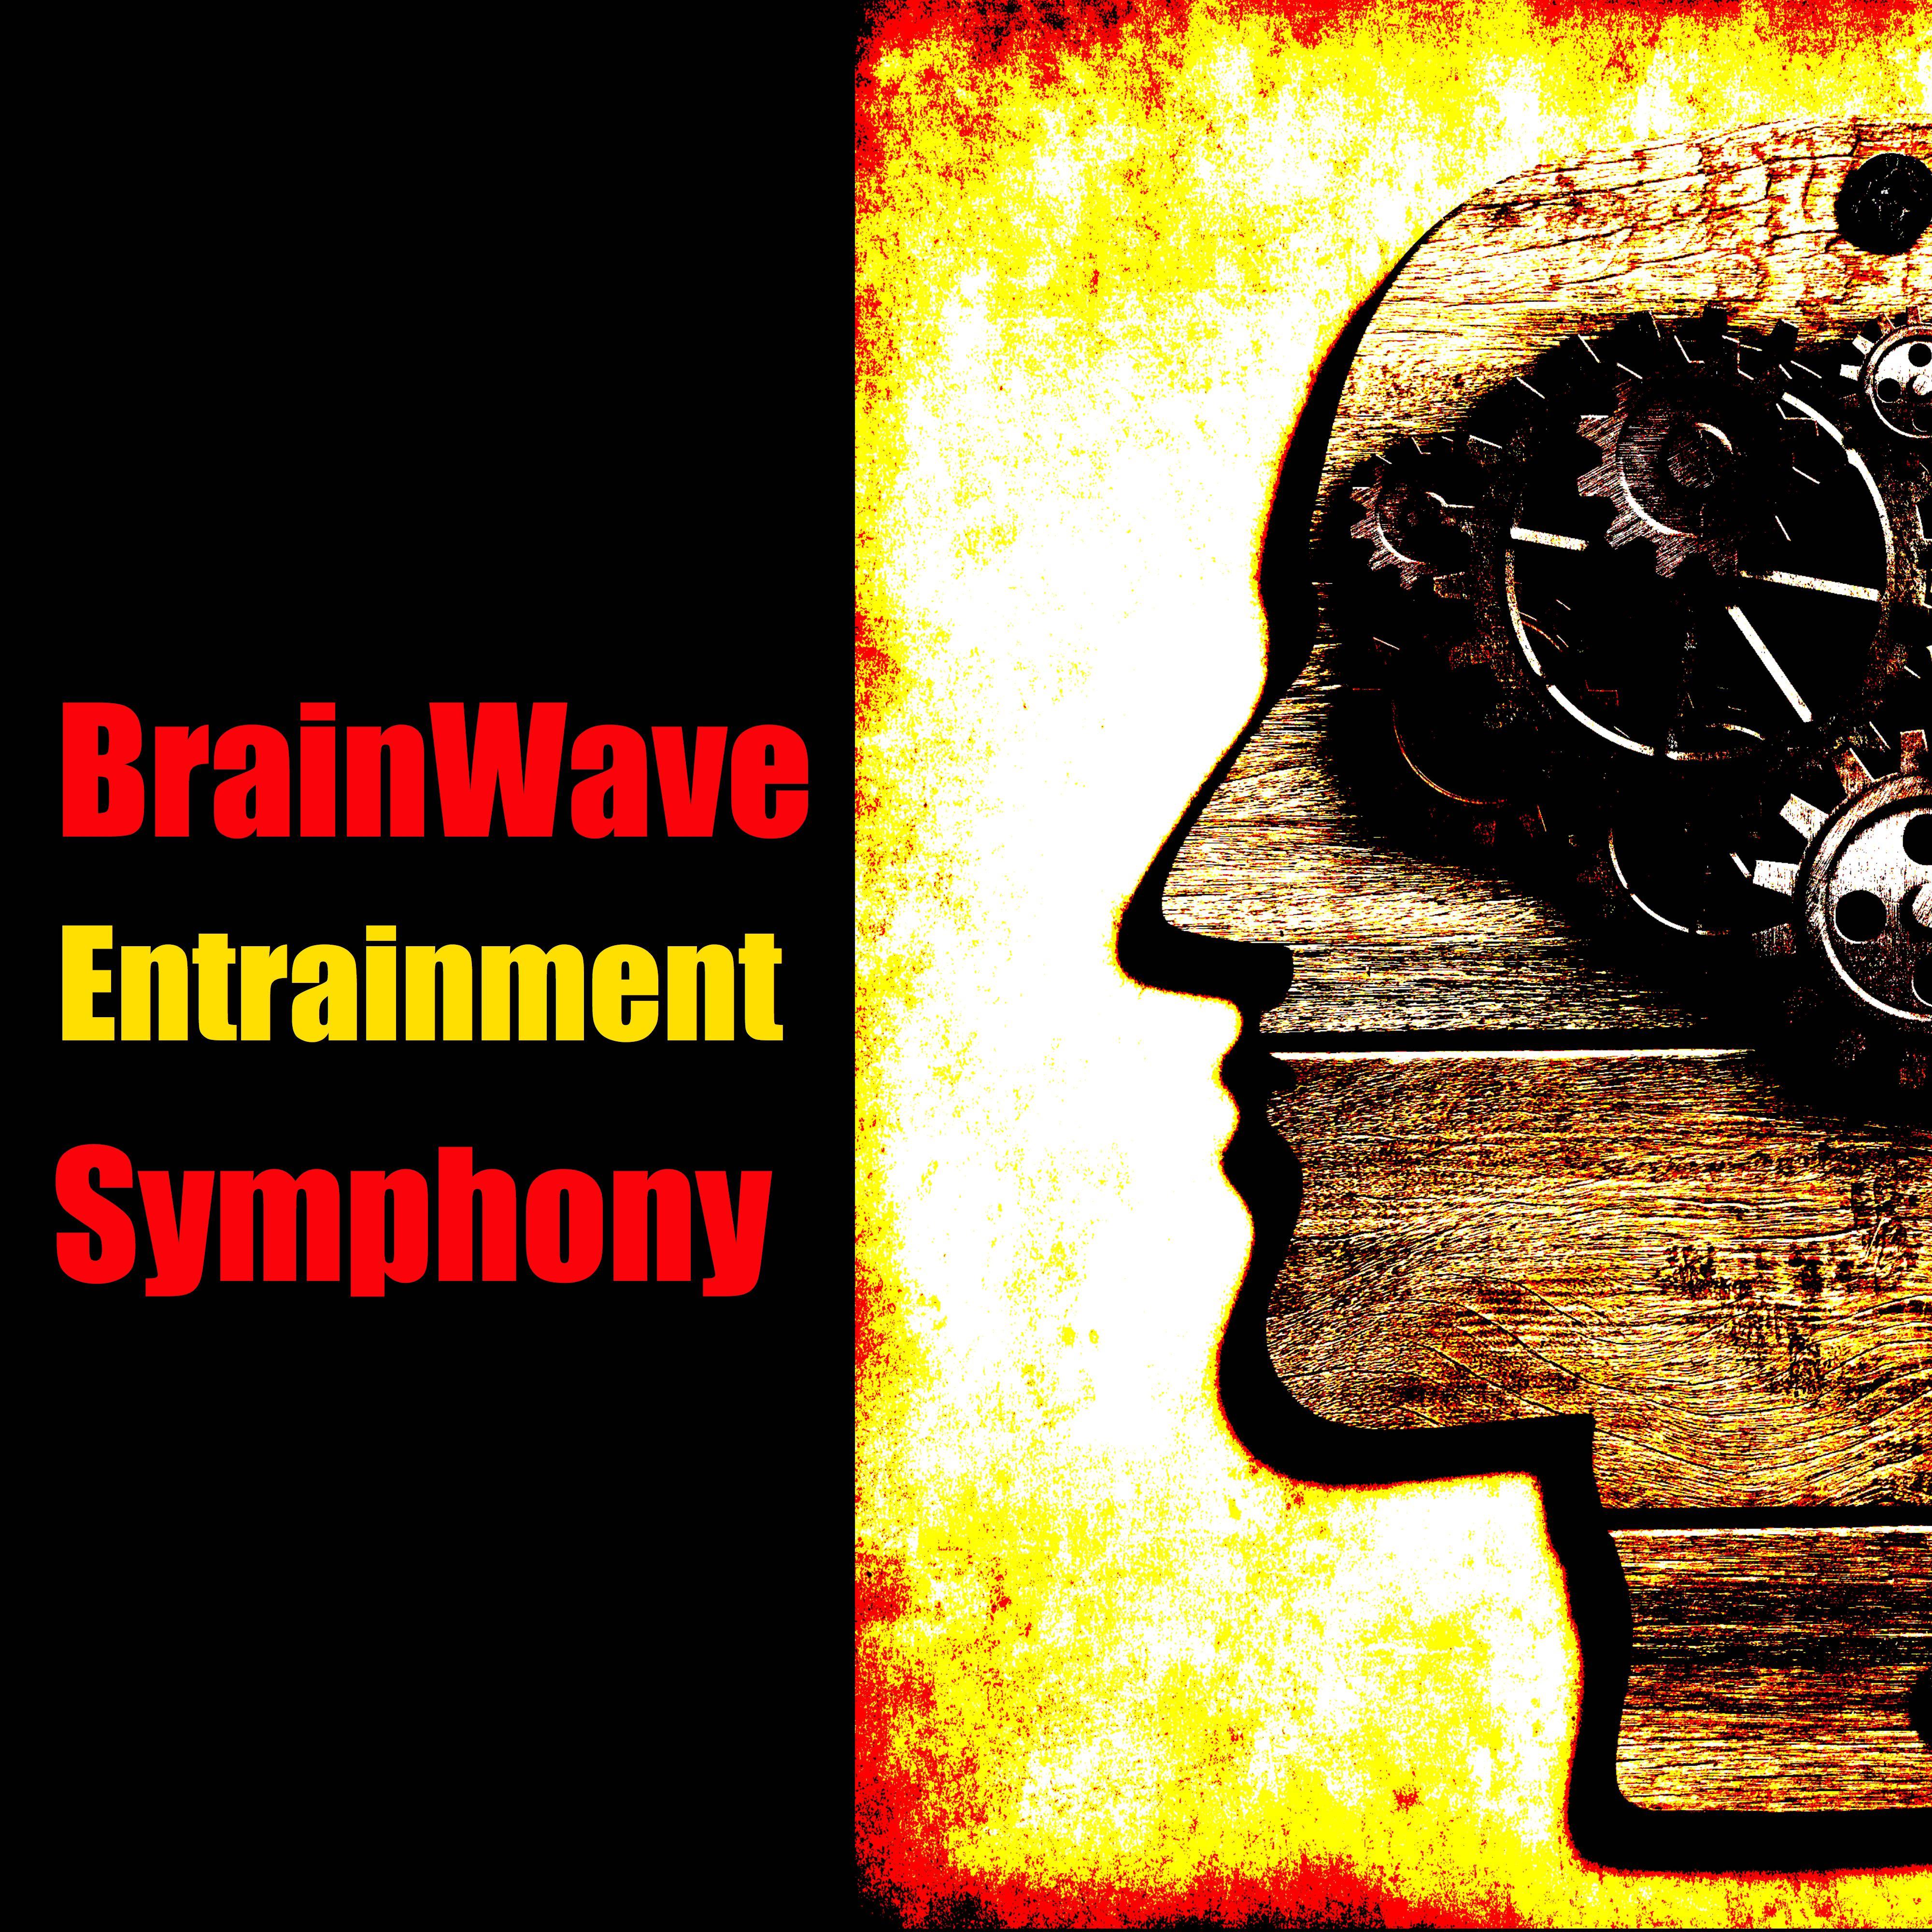 Brainwave Entrainment Symphony: Binaural Beats and Isochronic Tones for Brain Stimulation and Memorize